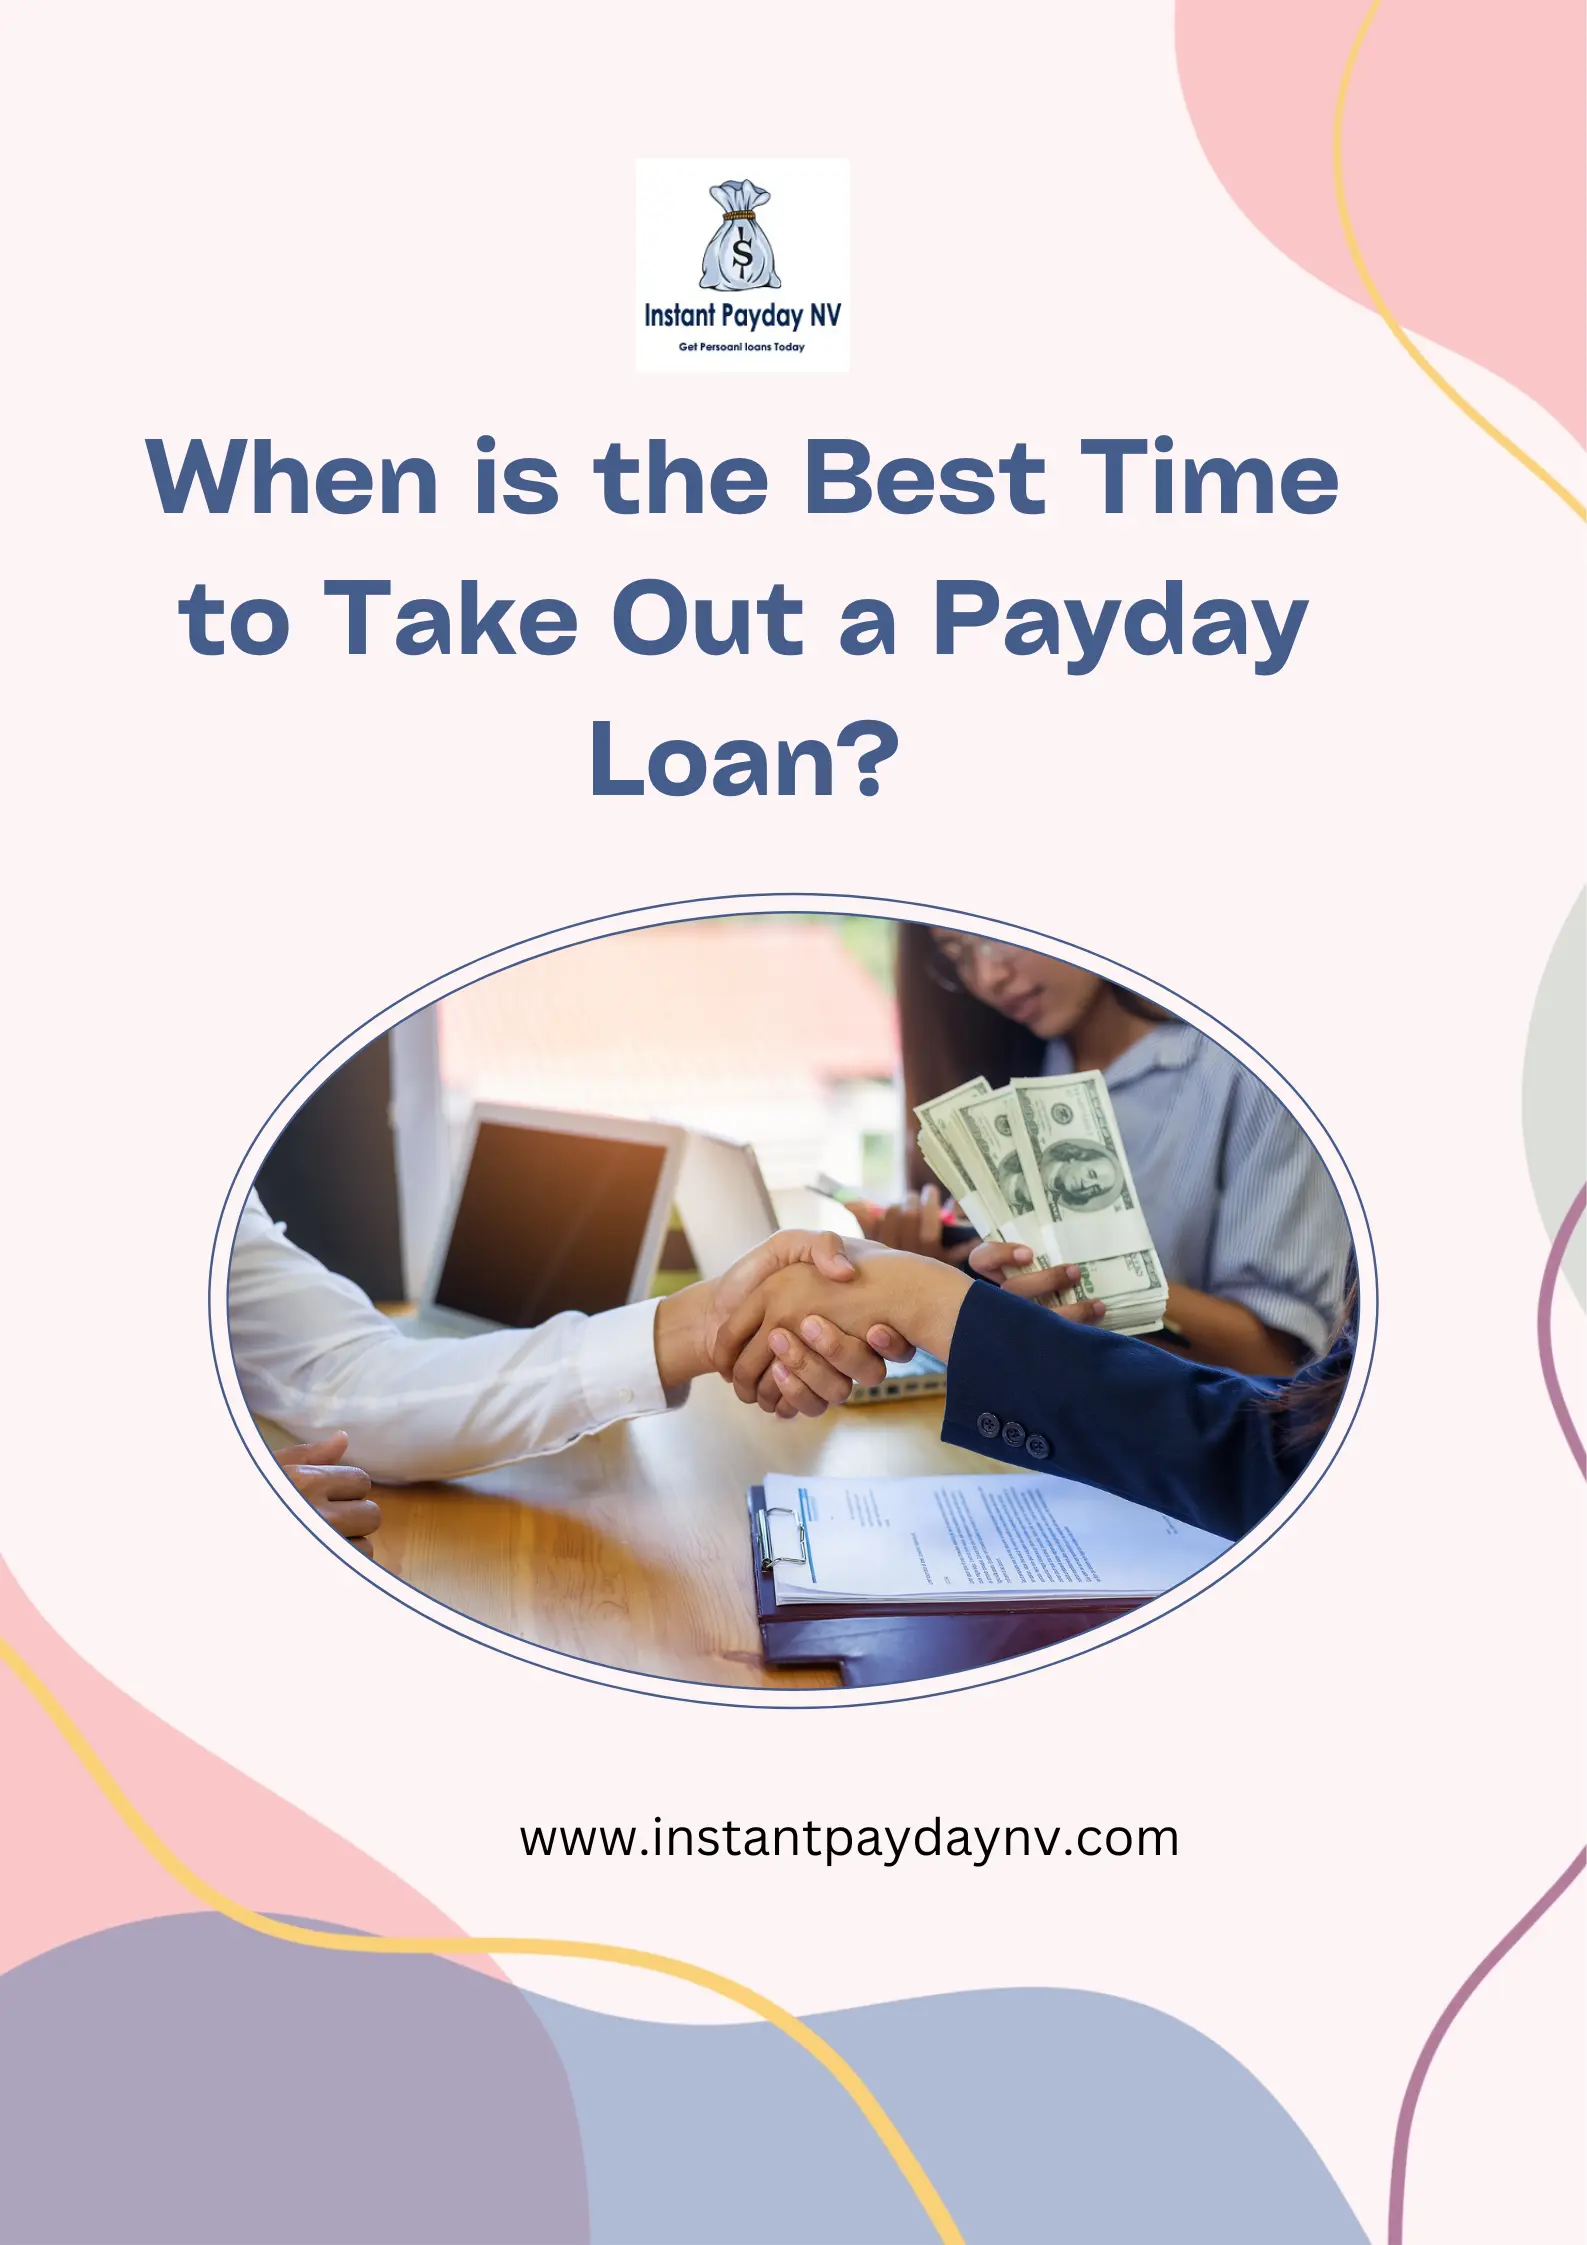 When is the best time to take out a payday loan